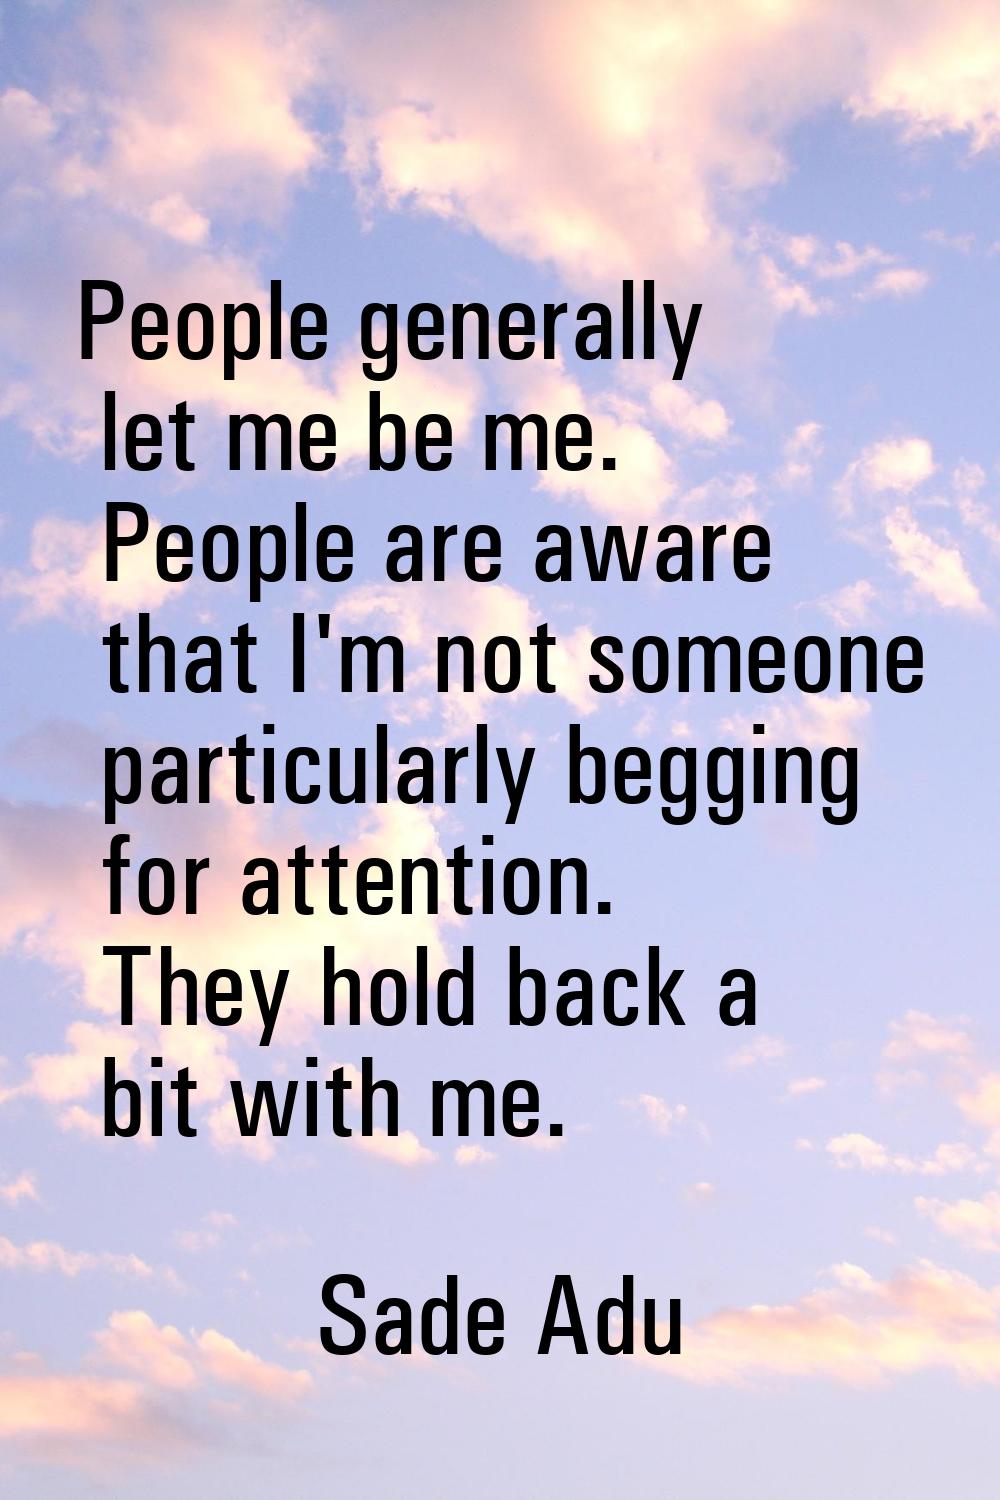 People generally let me be me. People are aware that I'm not someone particularly begging for atten